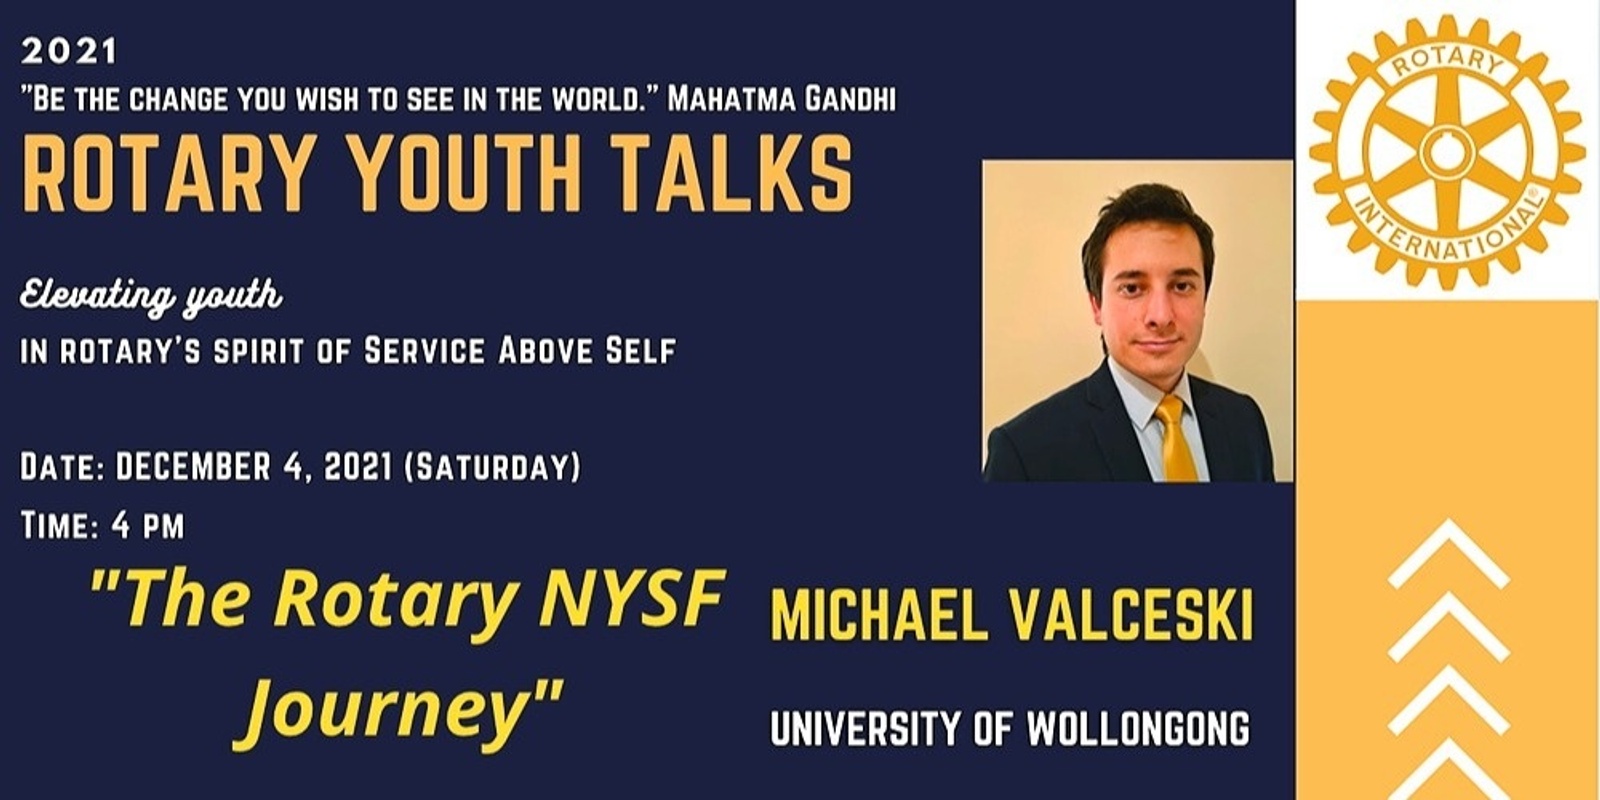 Banner image for Rotary Youth Talk - The Rotary NYSF Journey by Michael Valceski